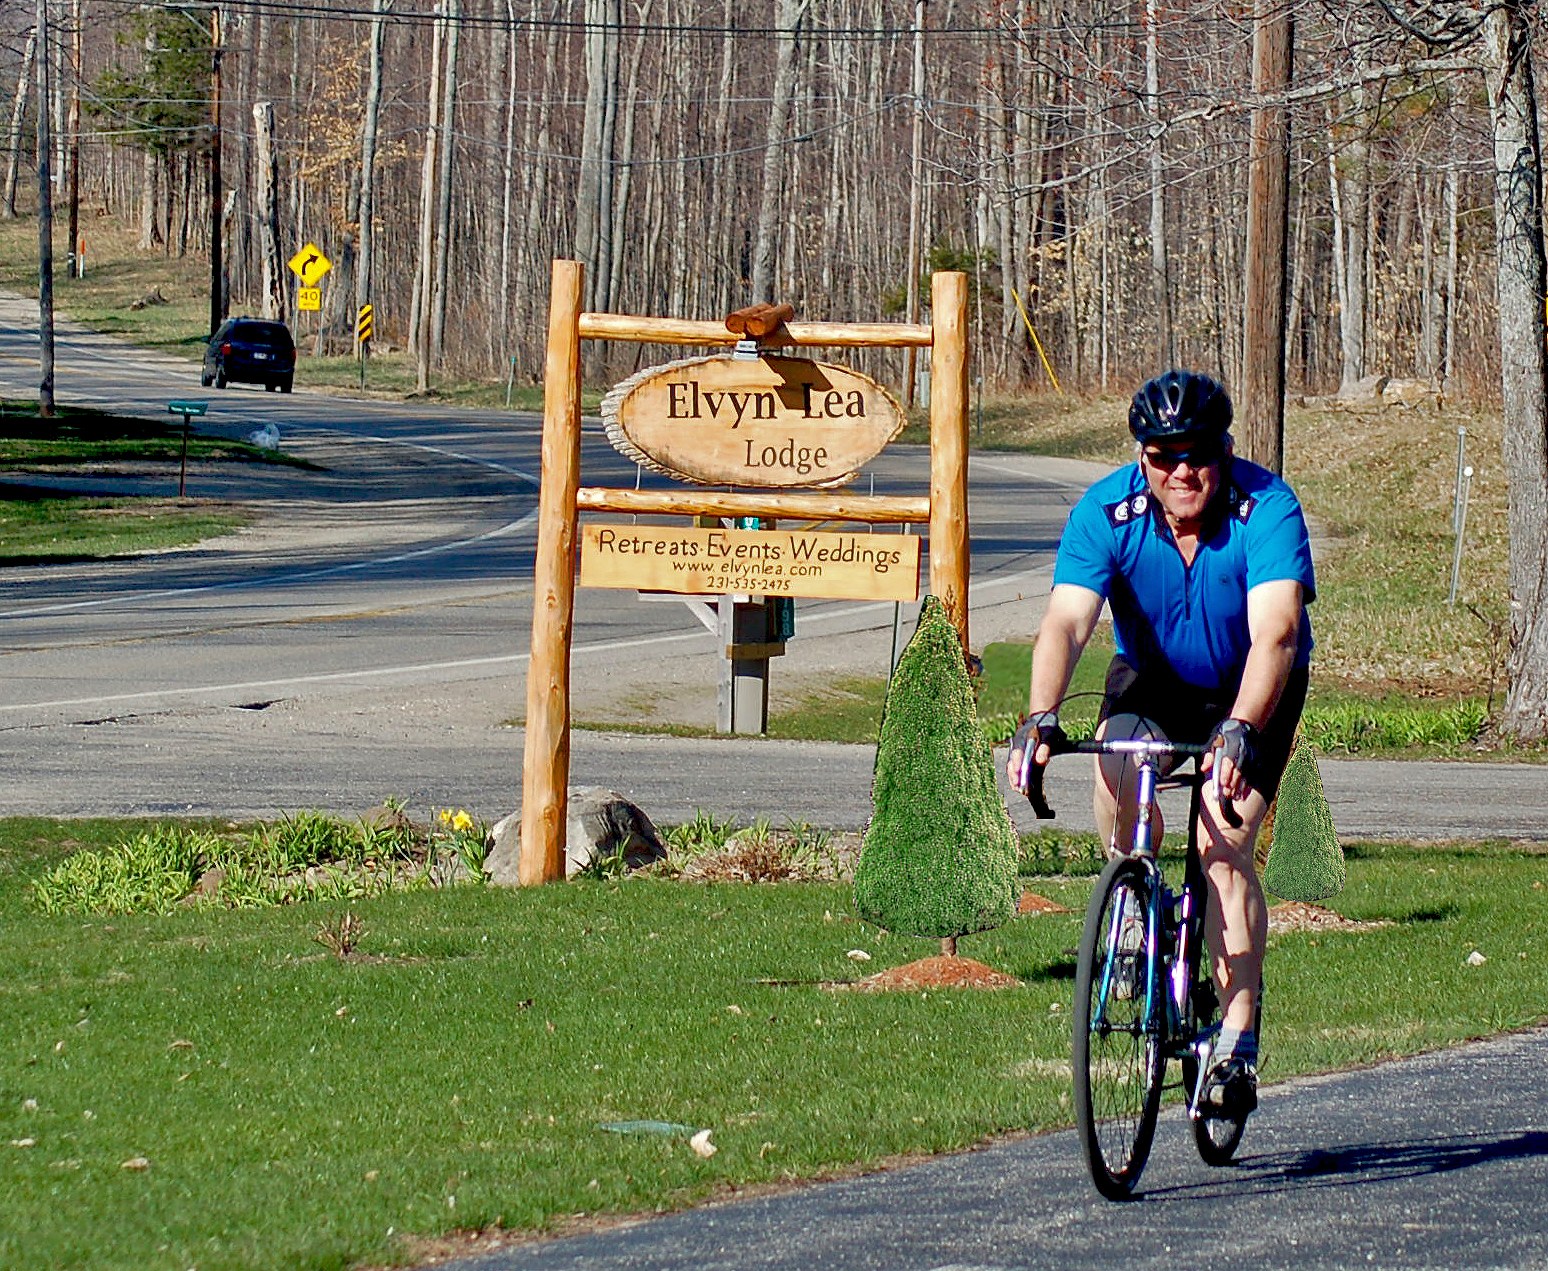 The scenic roads and trails of northern Michigan are perfect for cycling.